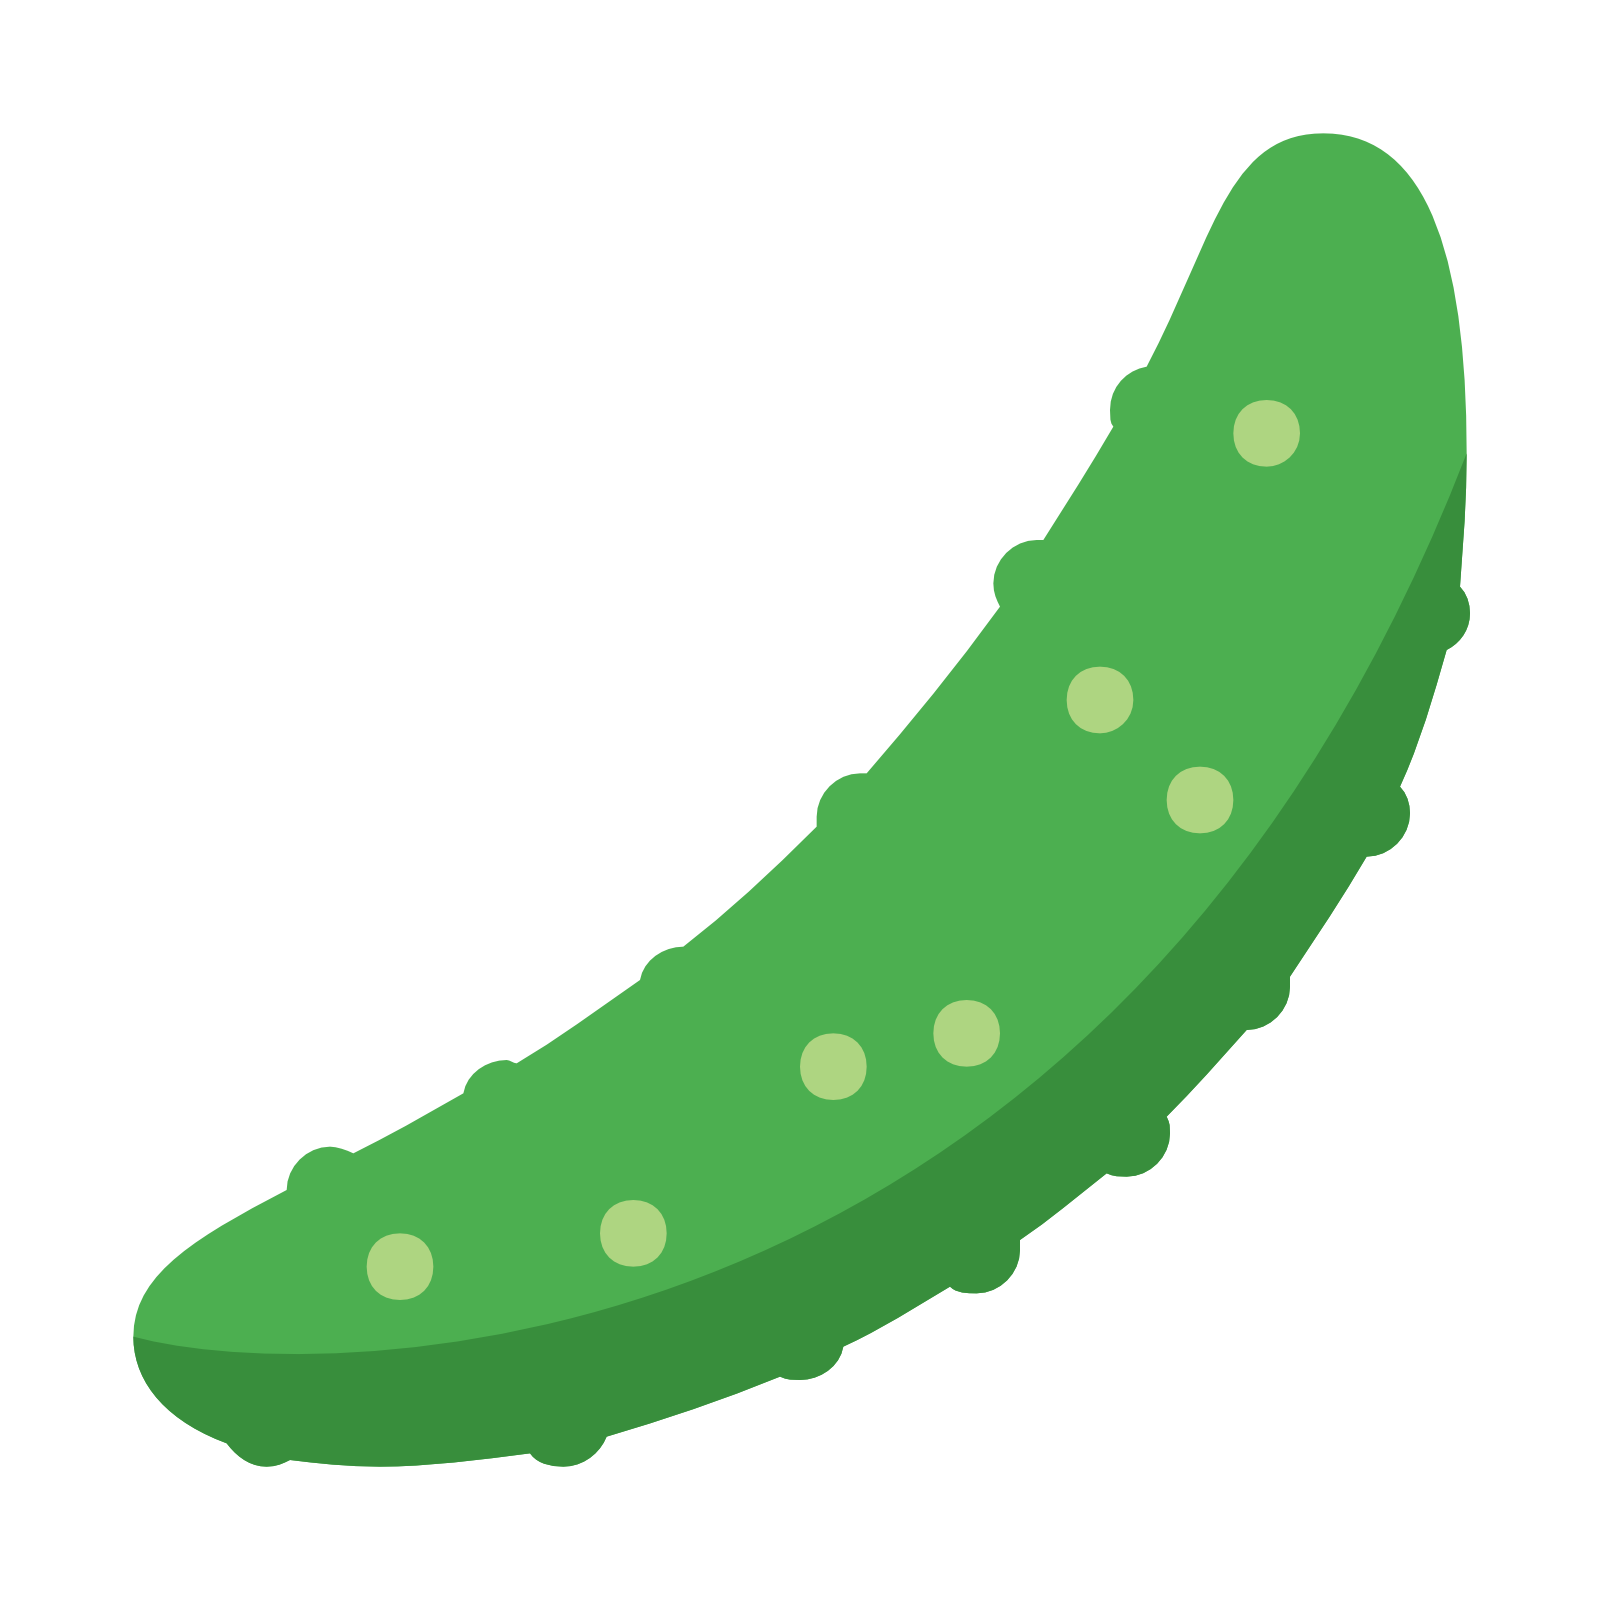 pickles clipart cool as cucumber